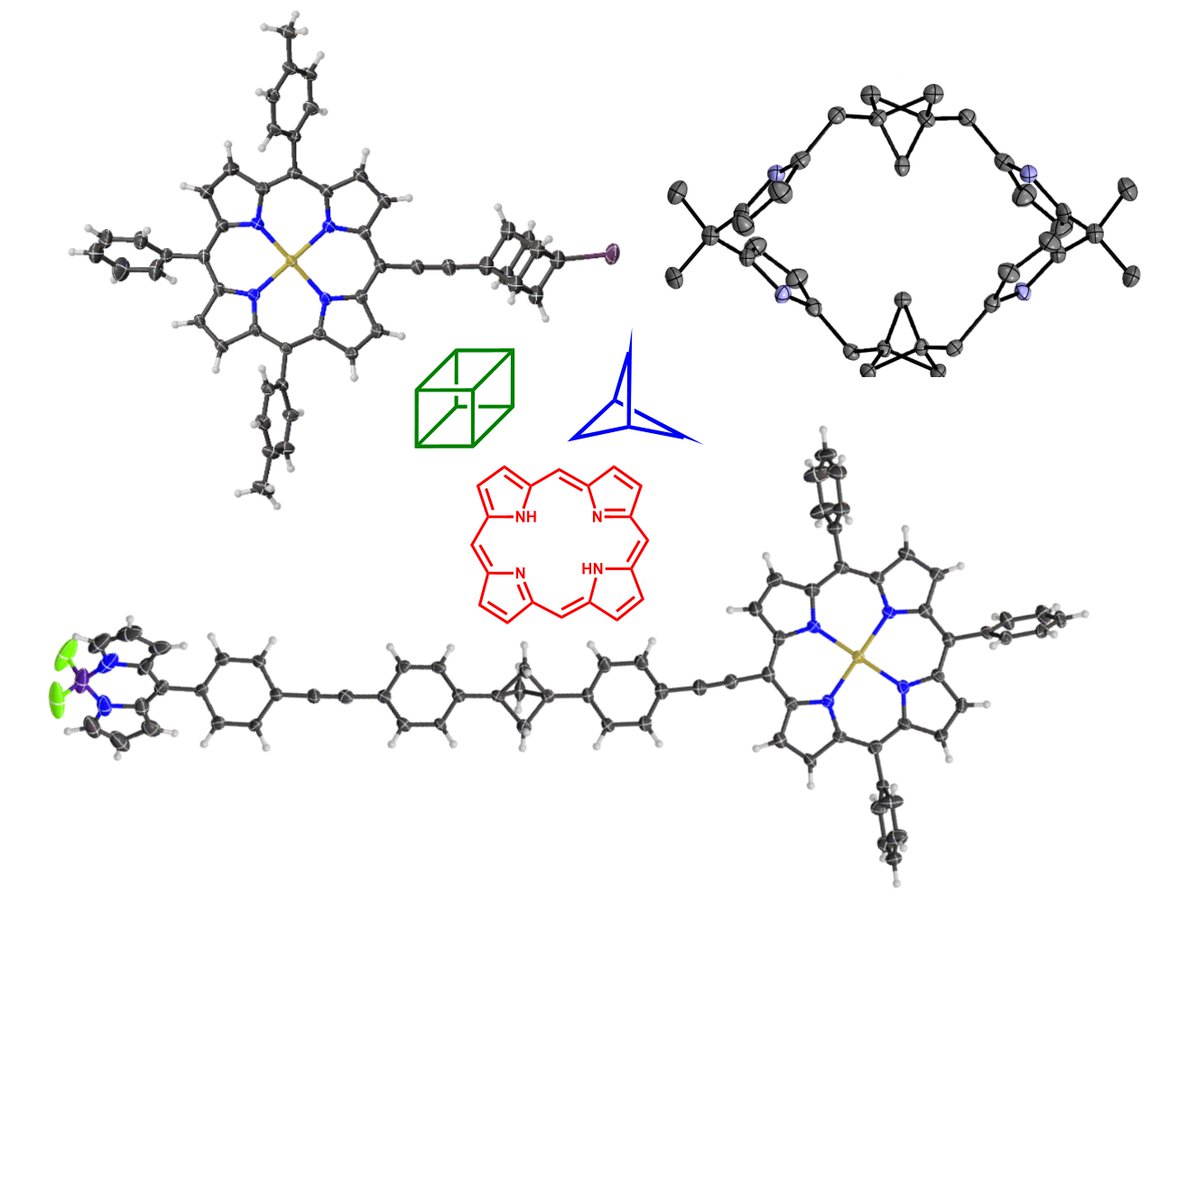 If you like molecules such as these ... we are hiring 😀 📢! Postdoc position (2a) - Synthesis of functional organic materials with strained hydrocarbons; #cubane, #porphyrins, #bicyclopentane hot science 🔥⚗️, cool group👩‍🔬👨‍🔬 @TCD_Chemistry 🇮🇪 @ias_tum 🇩🇪 euraxess.ec.europa.eu/jobs/234790